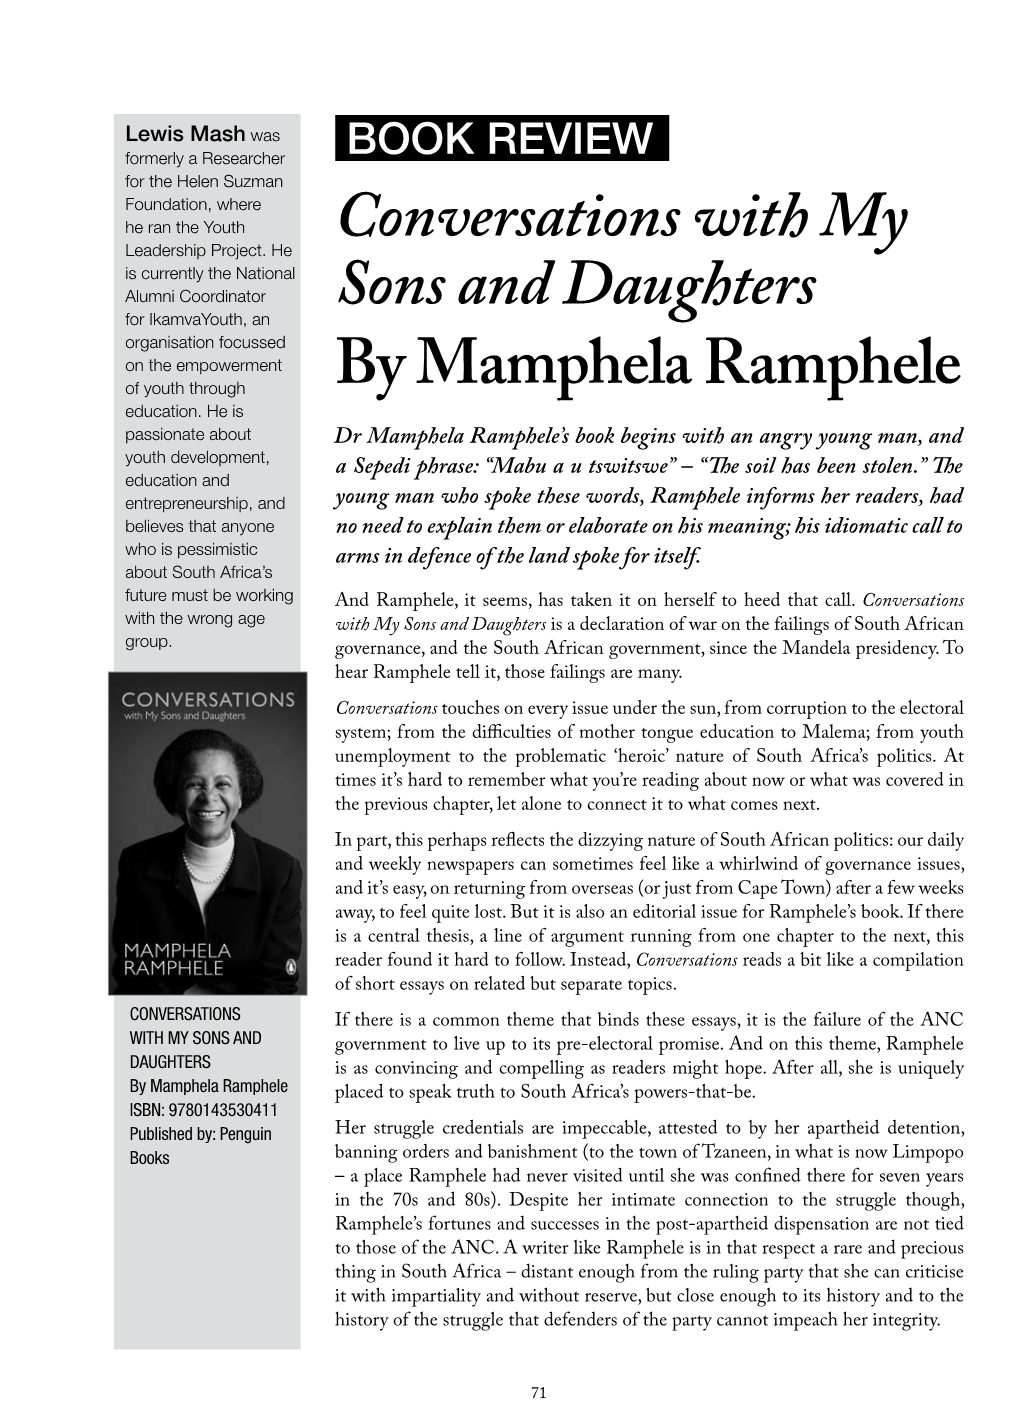 Conversations with My Sons and Daughters by Mamphela Ramphele